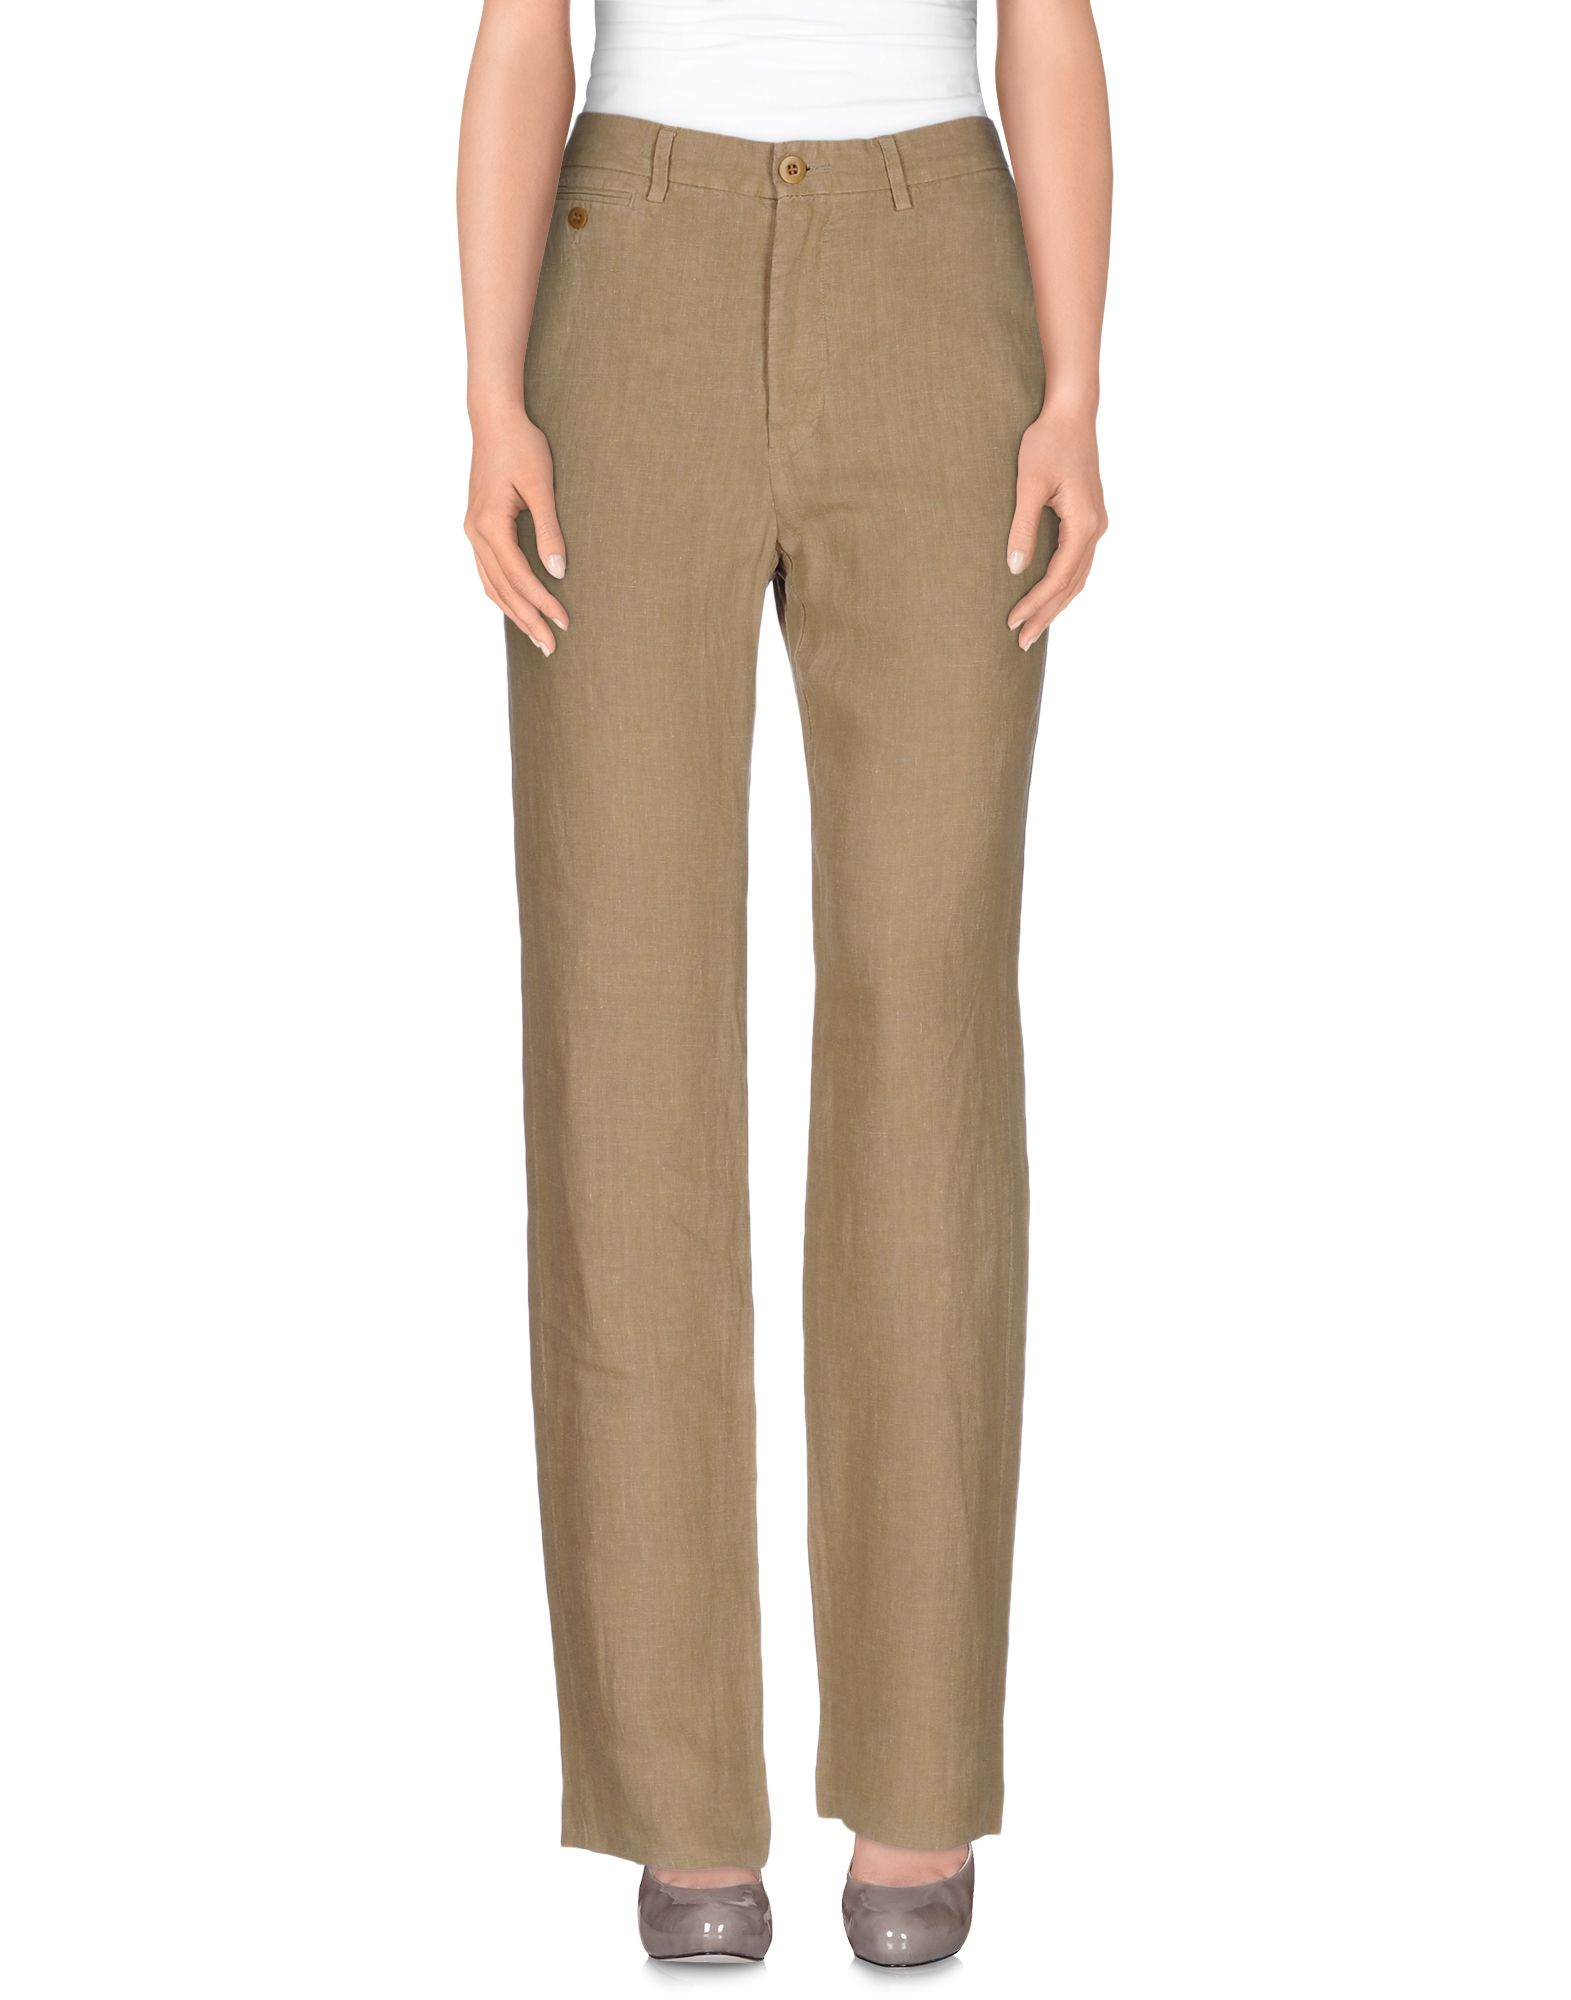 Dockers Casual Trouser in Beige (Sand) - Save 71% | Lyst